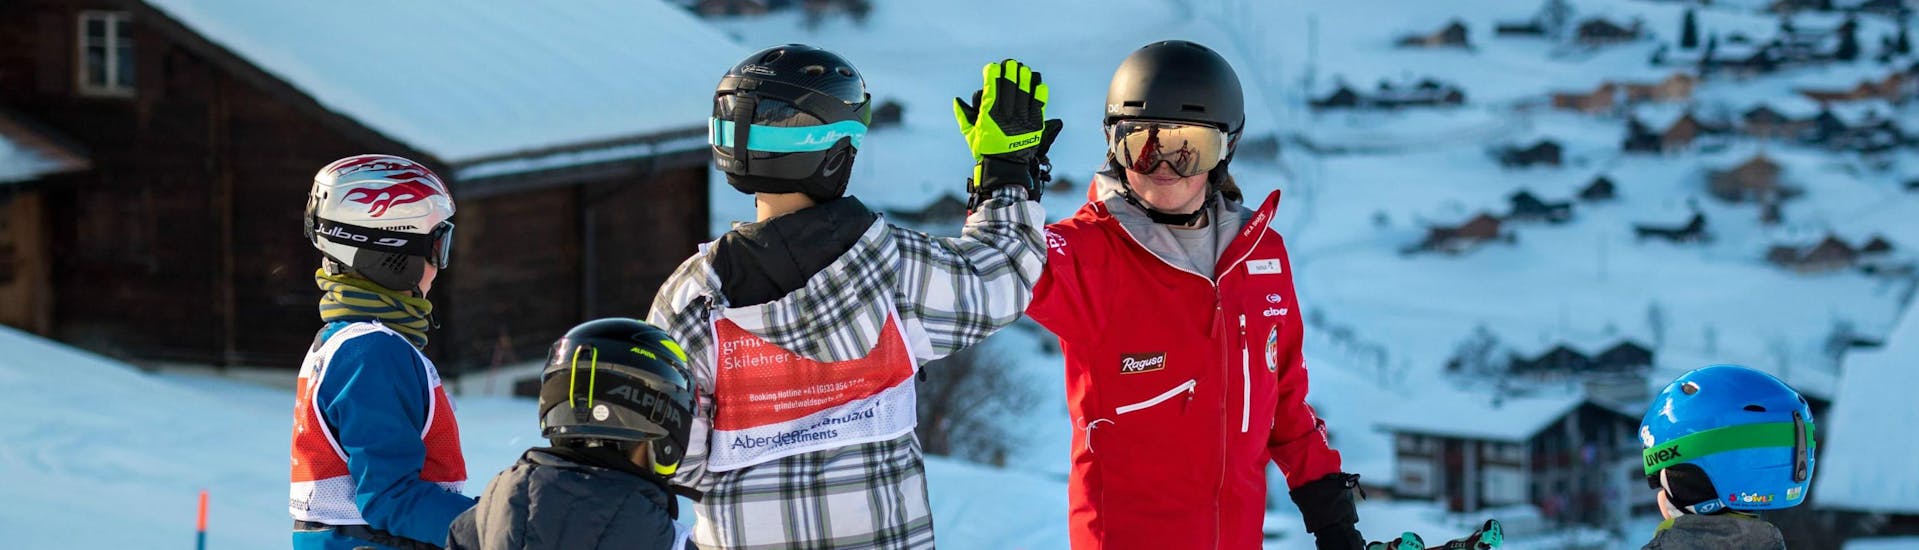 A group of young skiers have fun during their kids ski lessons for intermediates with the Grindelwald Ski School and give their instructor a high-five.